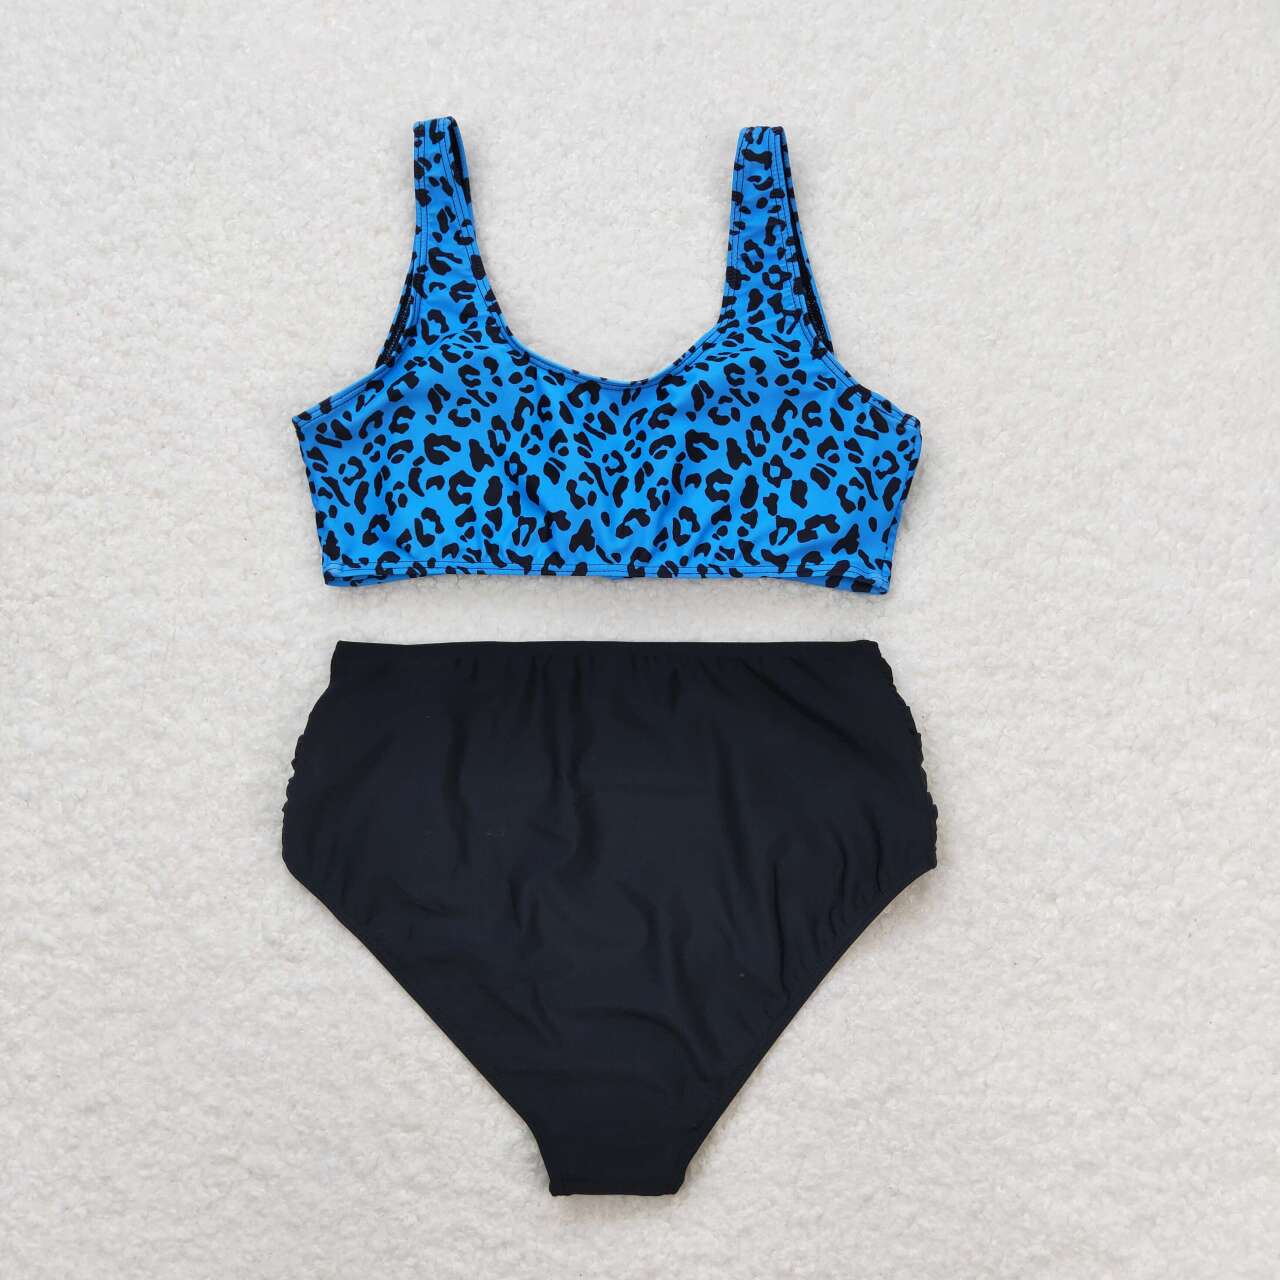 S0290 Leopard print blue and black swimsuit for adults